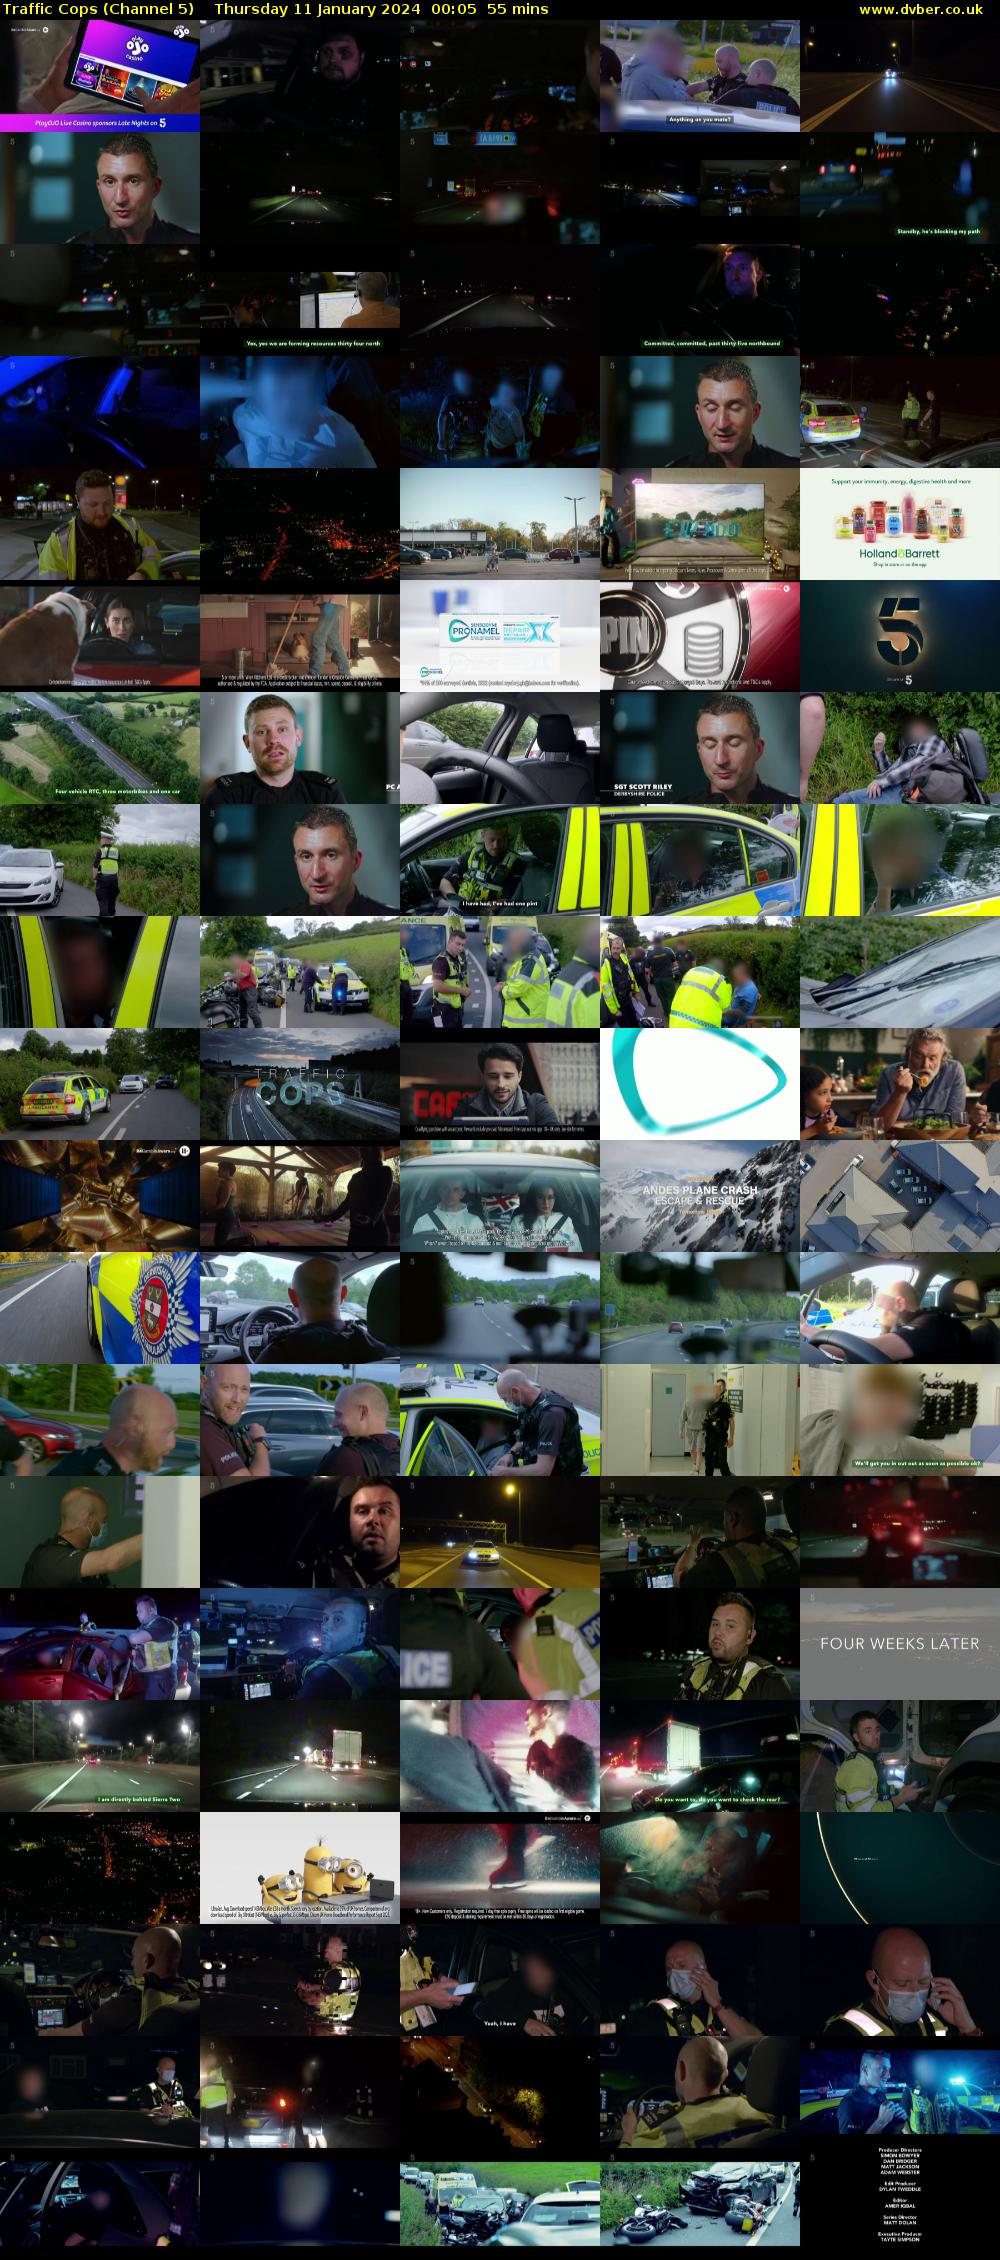 Traffic Cops (Channel 5) Thursday 11 January 2024 00:05 - 01:00